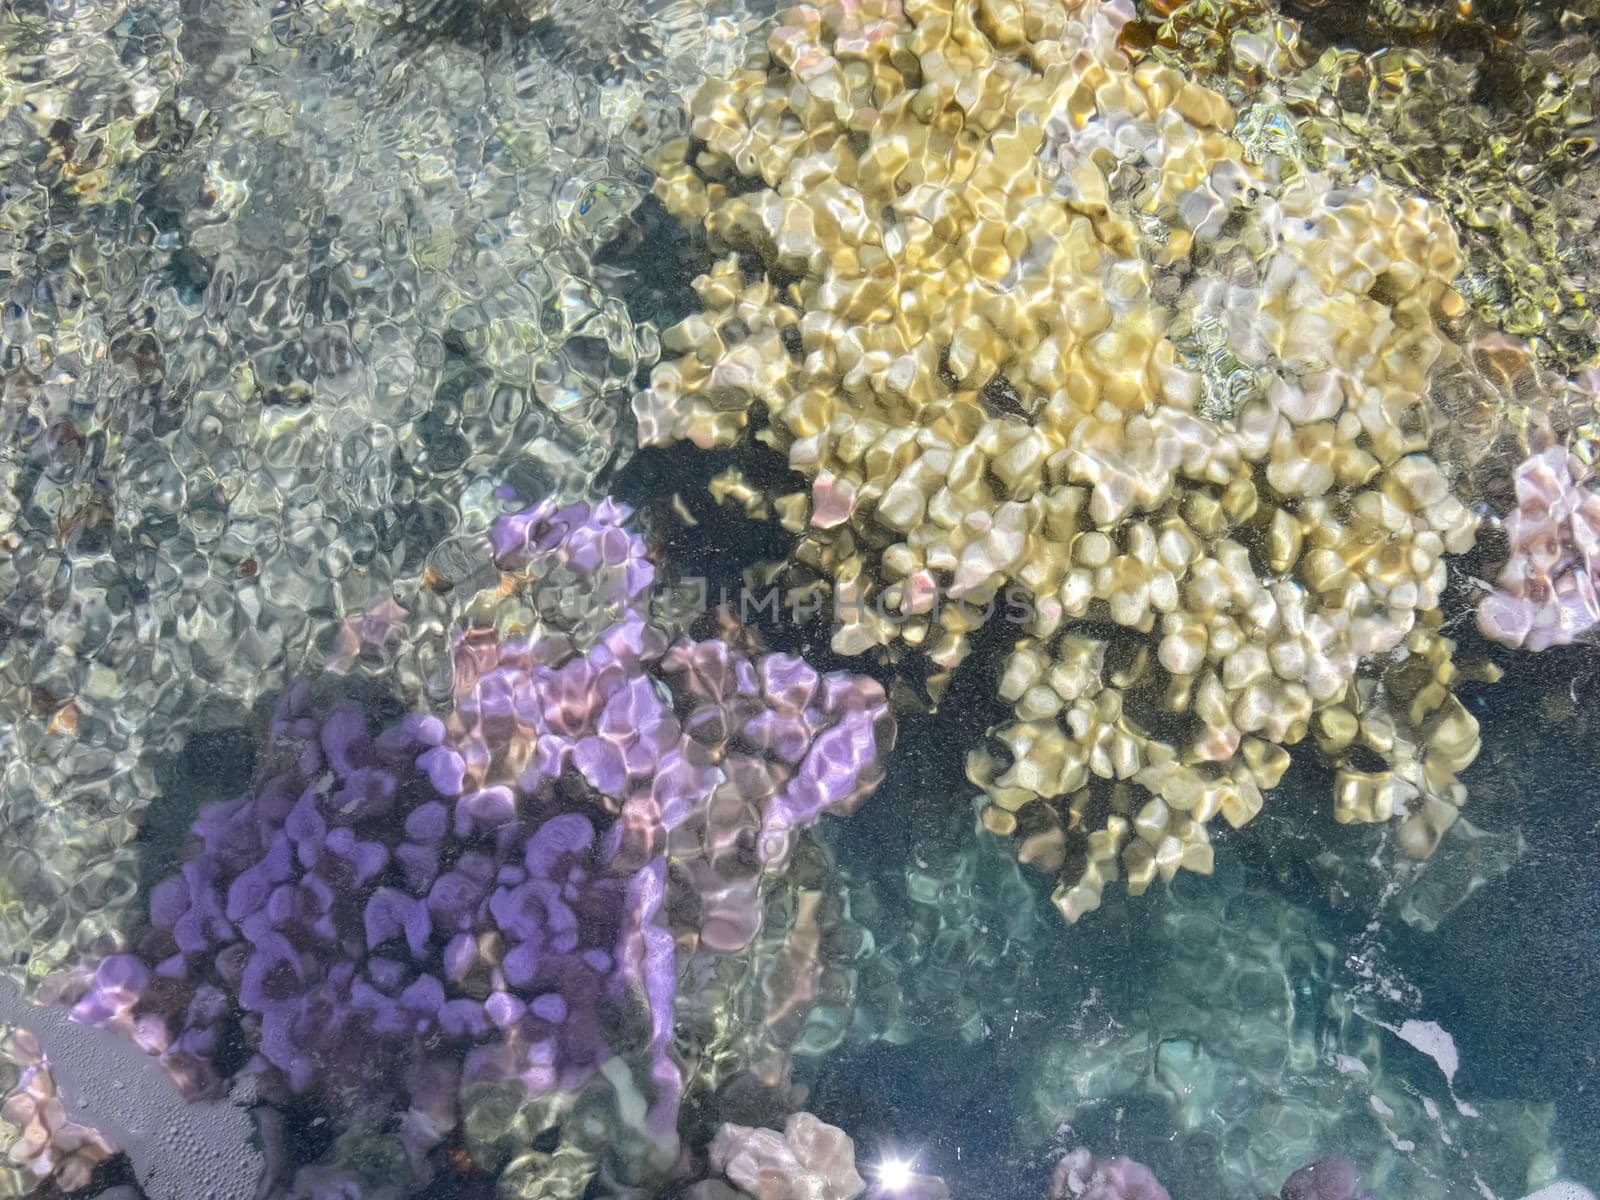 Sea corals near the shore in shallow water. Easter Island.